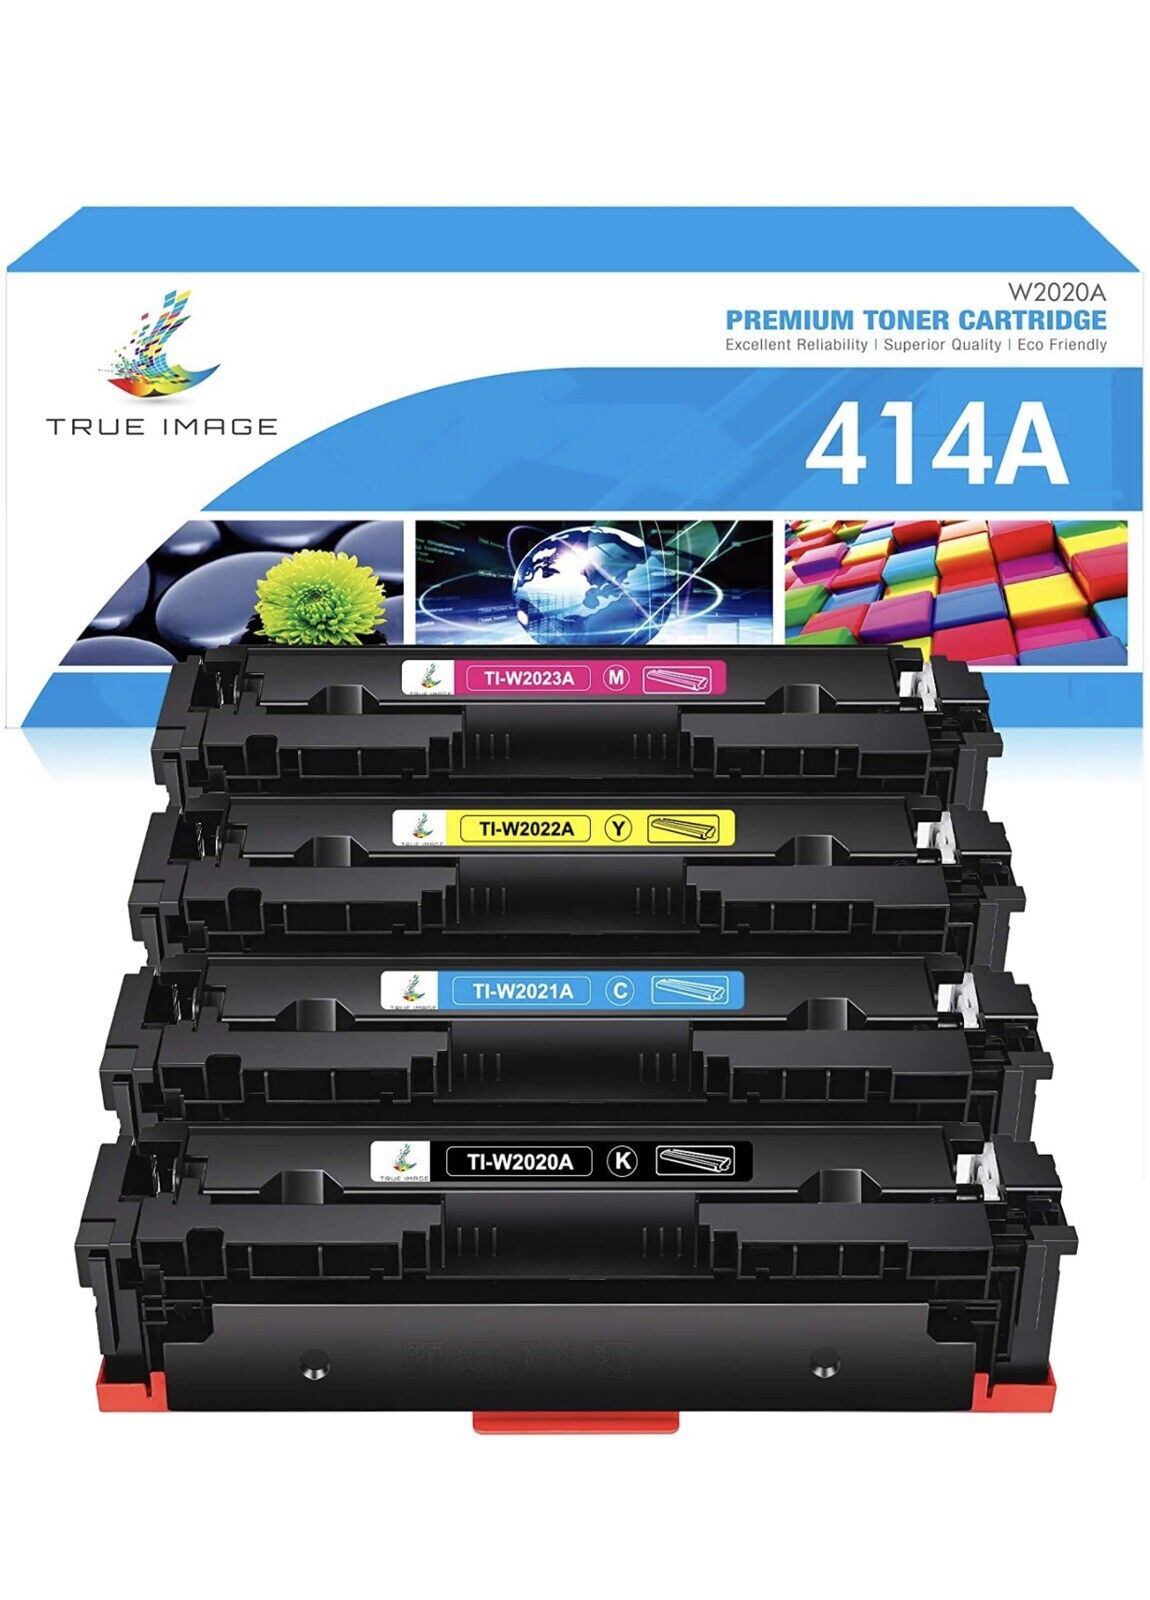 Premium Toner Cartridge, See Images For Comparability.